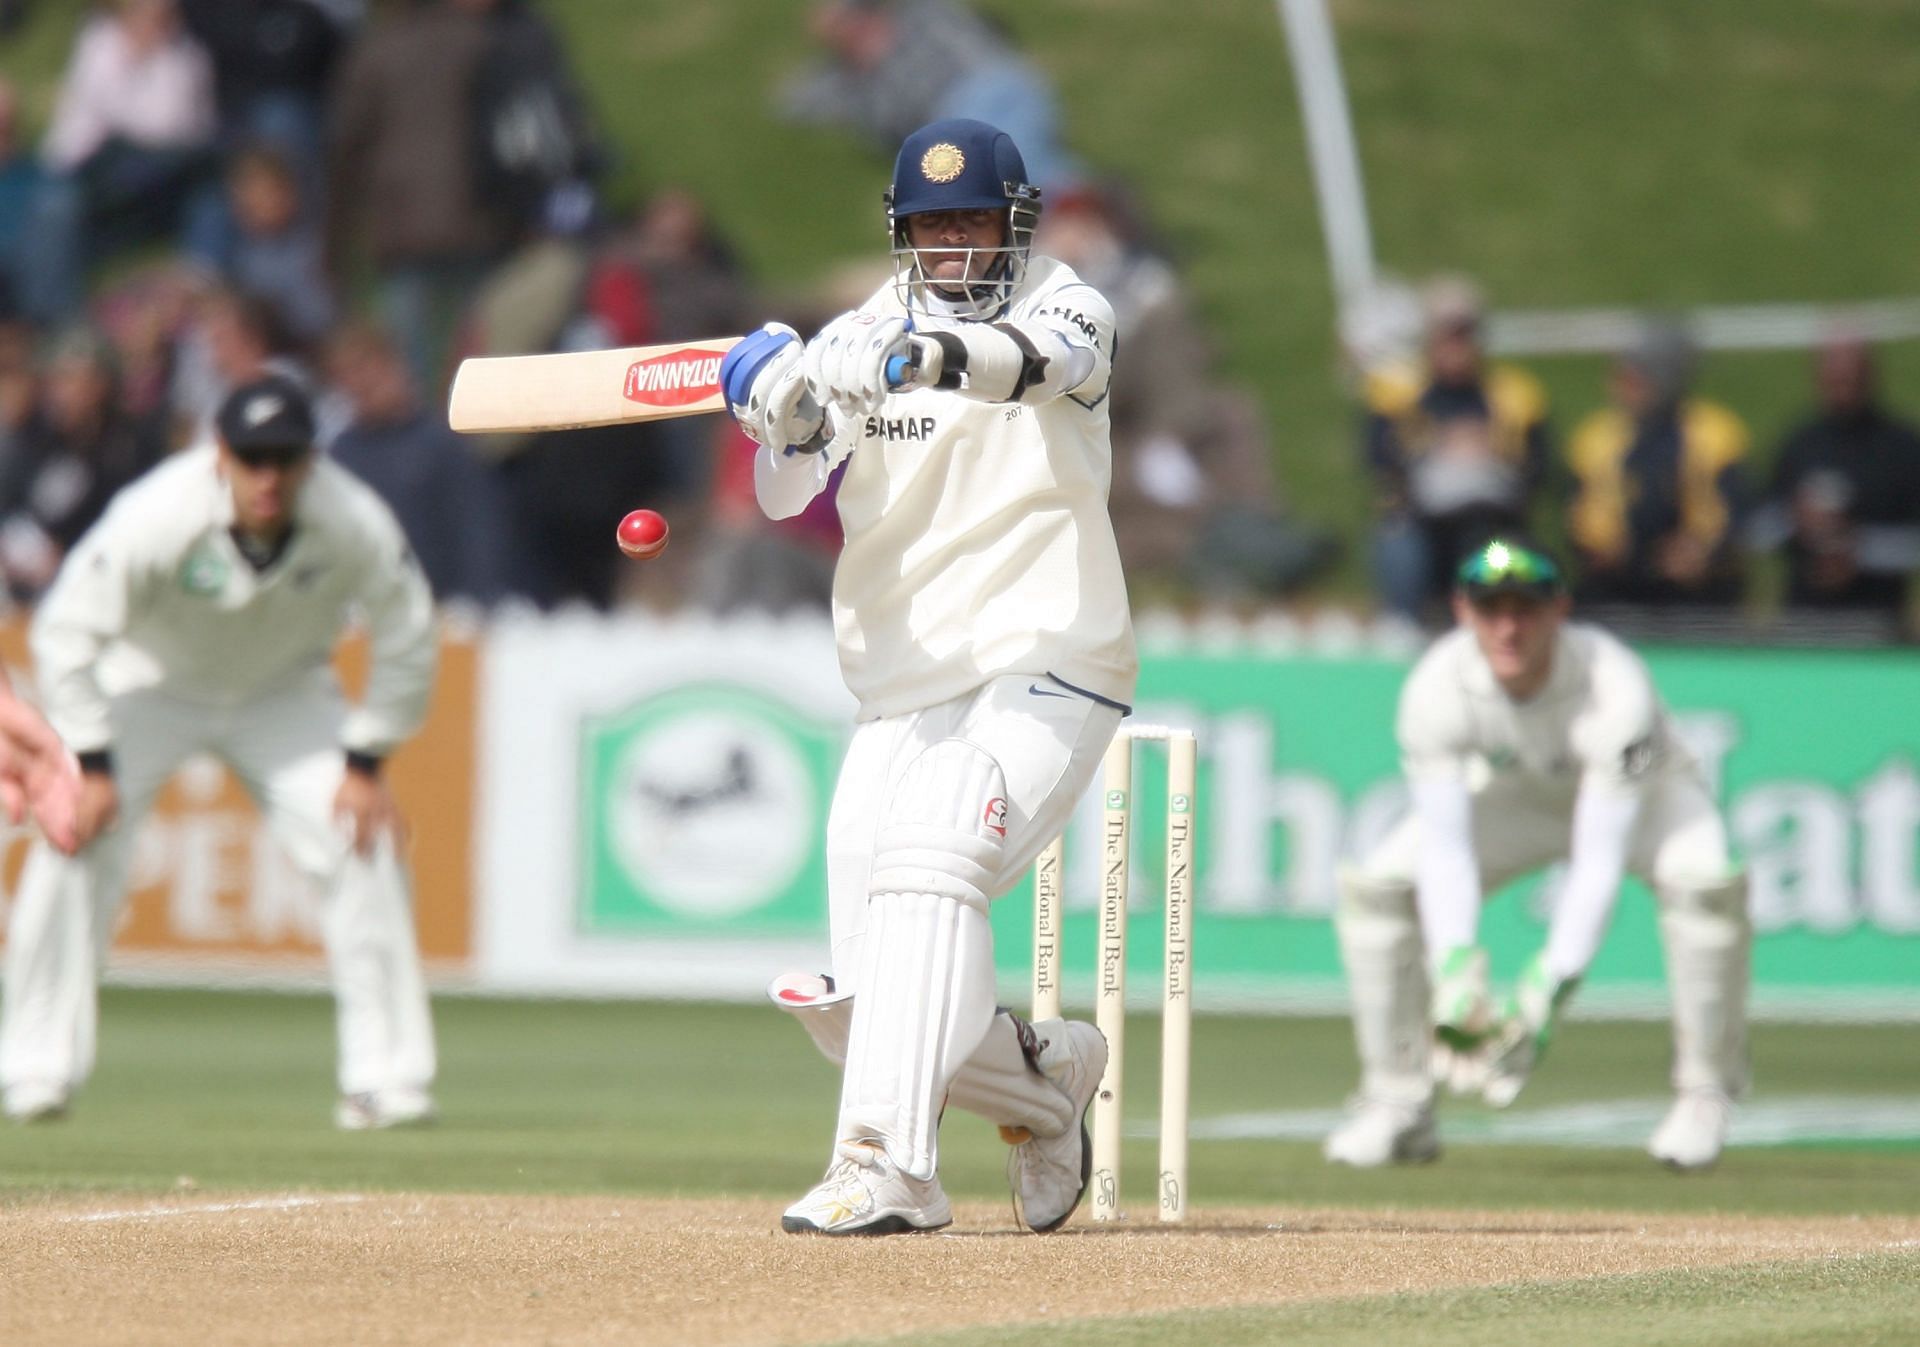 Rahul Dravid batting during a Test against New Zealand. Pic: Getty Images